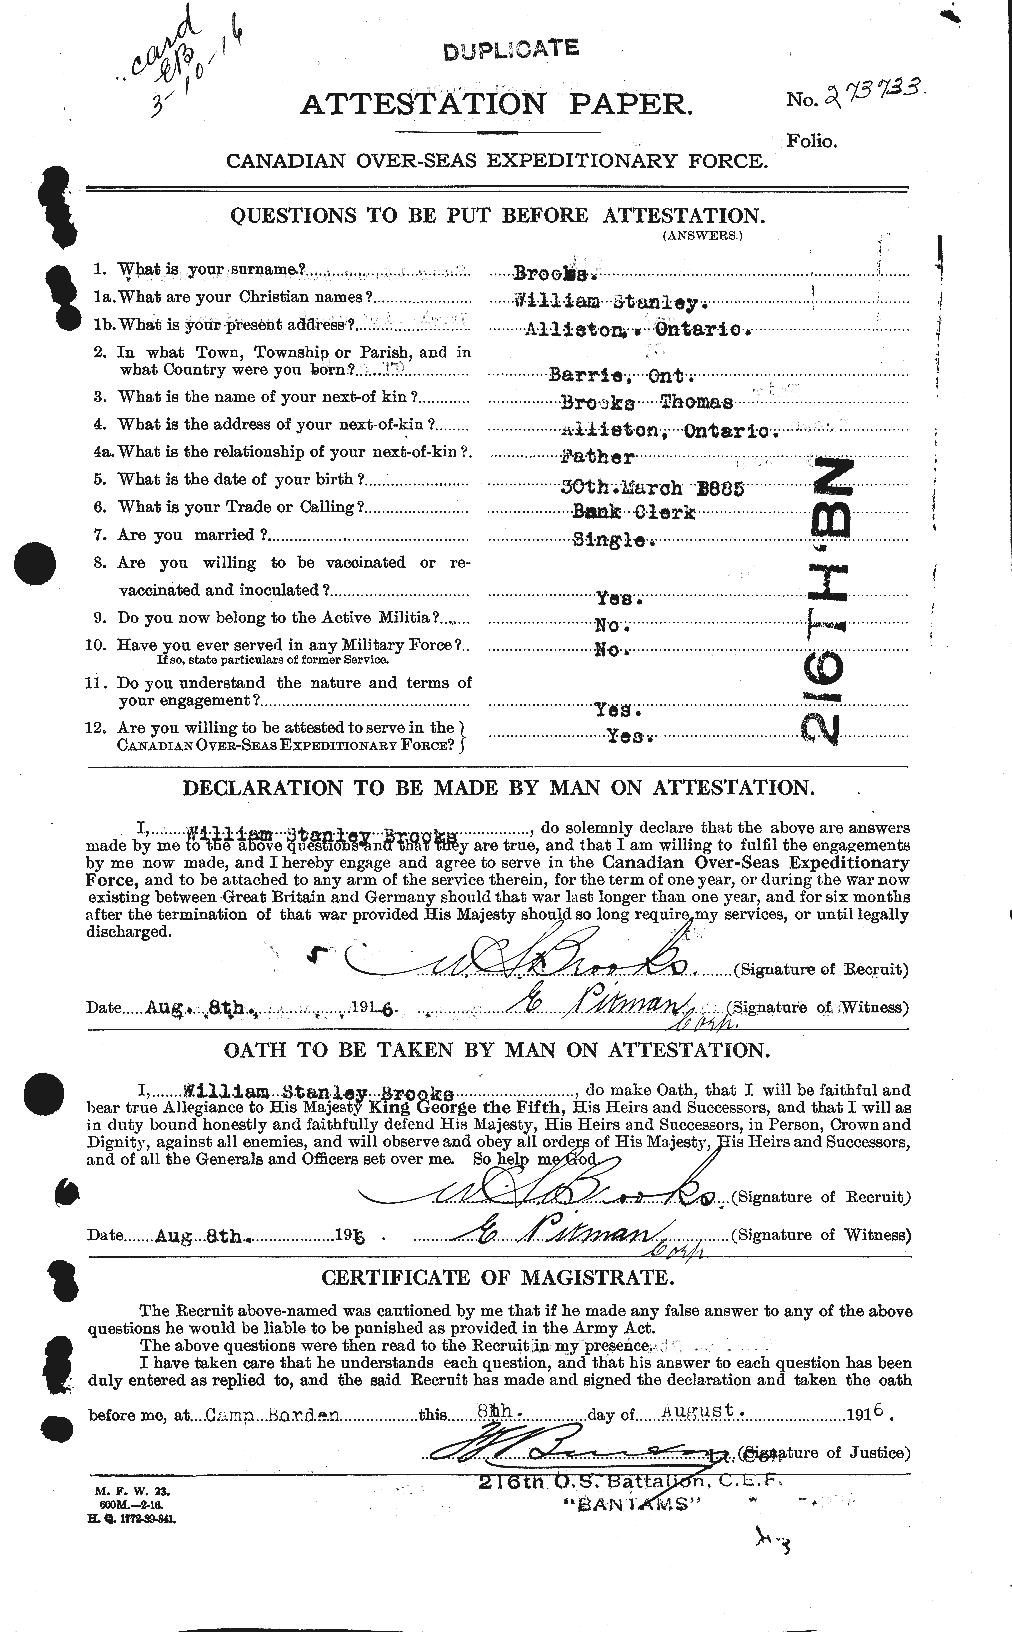 Personnel Records of the First World War - CEF 264764a